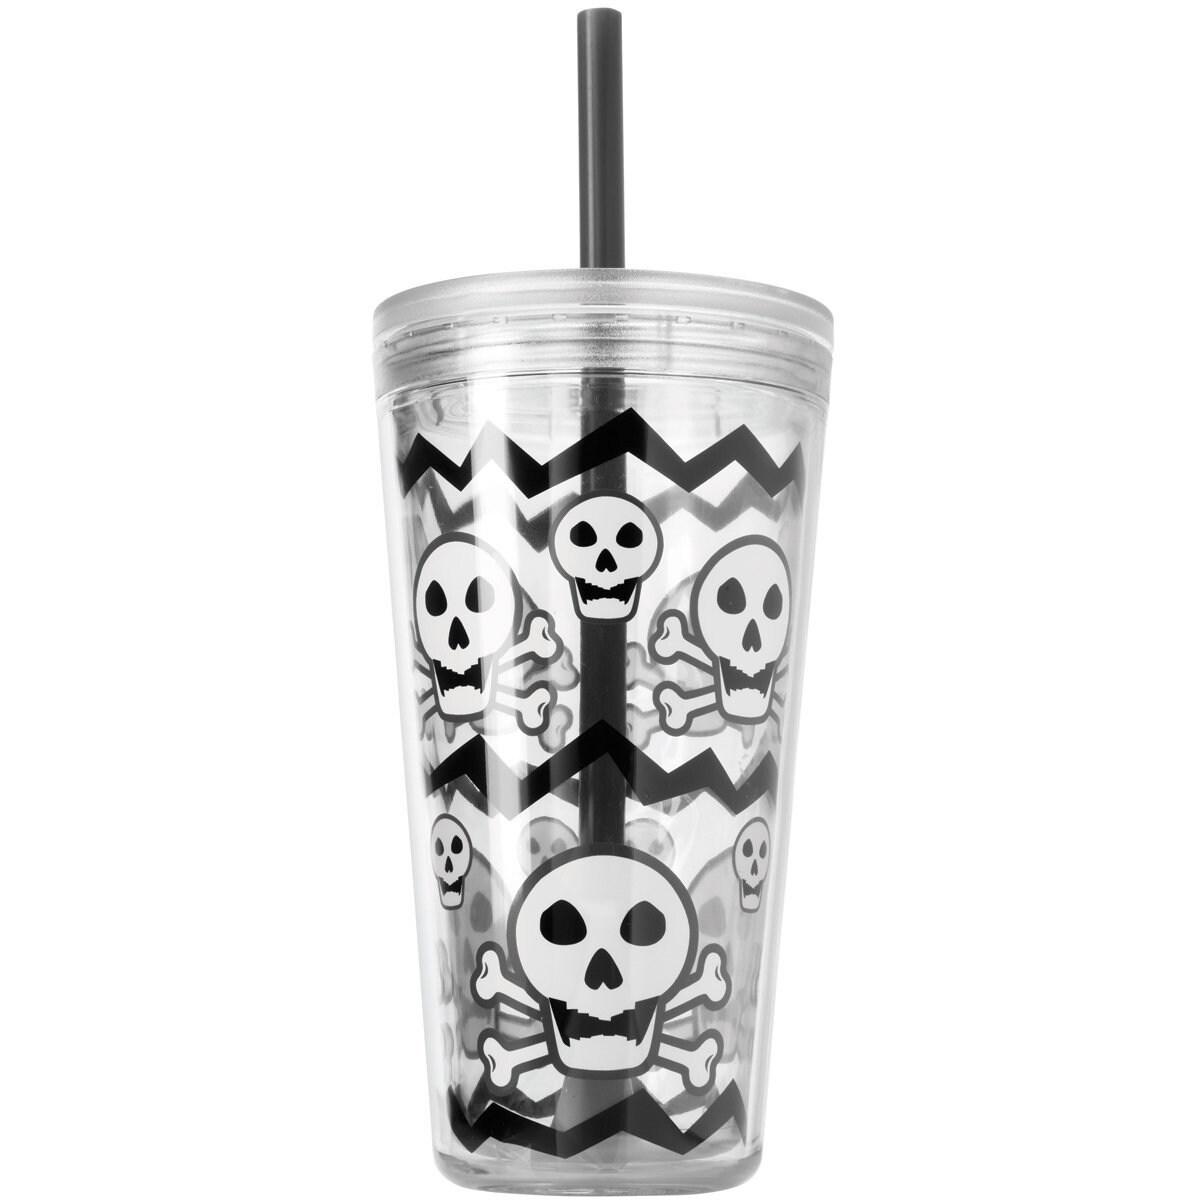 https://ak1.ostkcdn.com/images/products/is/images/direct/0ddaadba69ee8e613abc5082c2a04bd5455f03e9/Copco-Minimus-Tumbler-with-Straw%2C-24-Ounce%2C-Skull-Gray.jpg